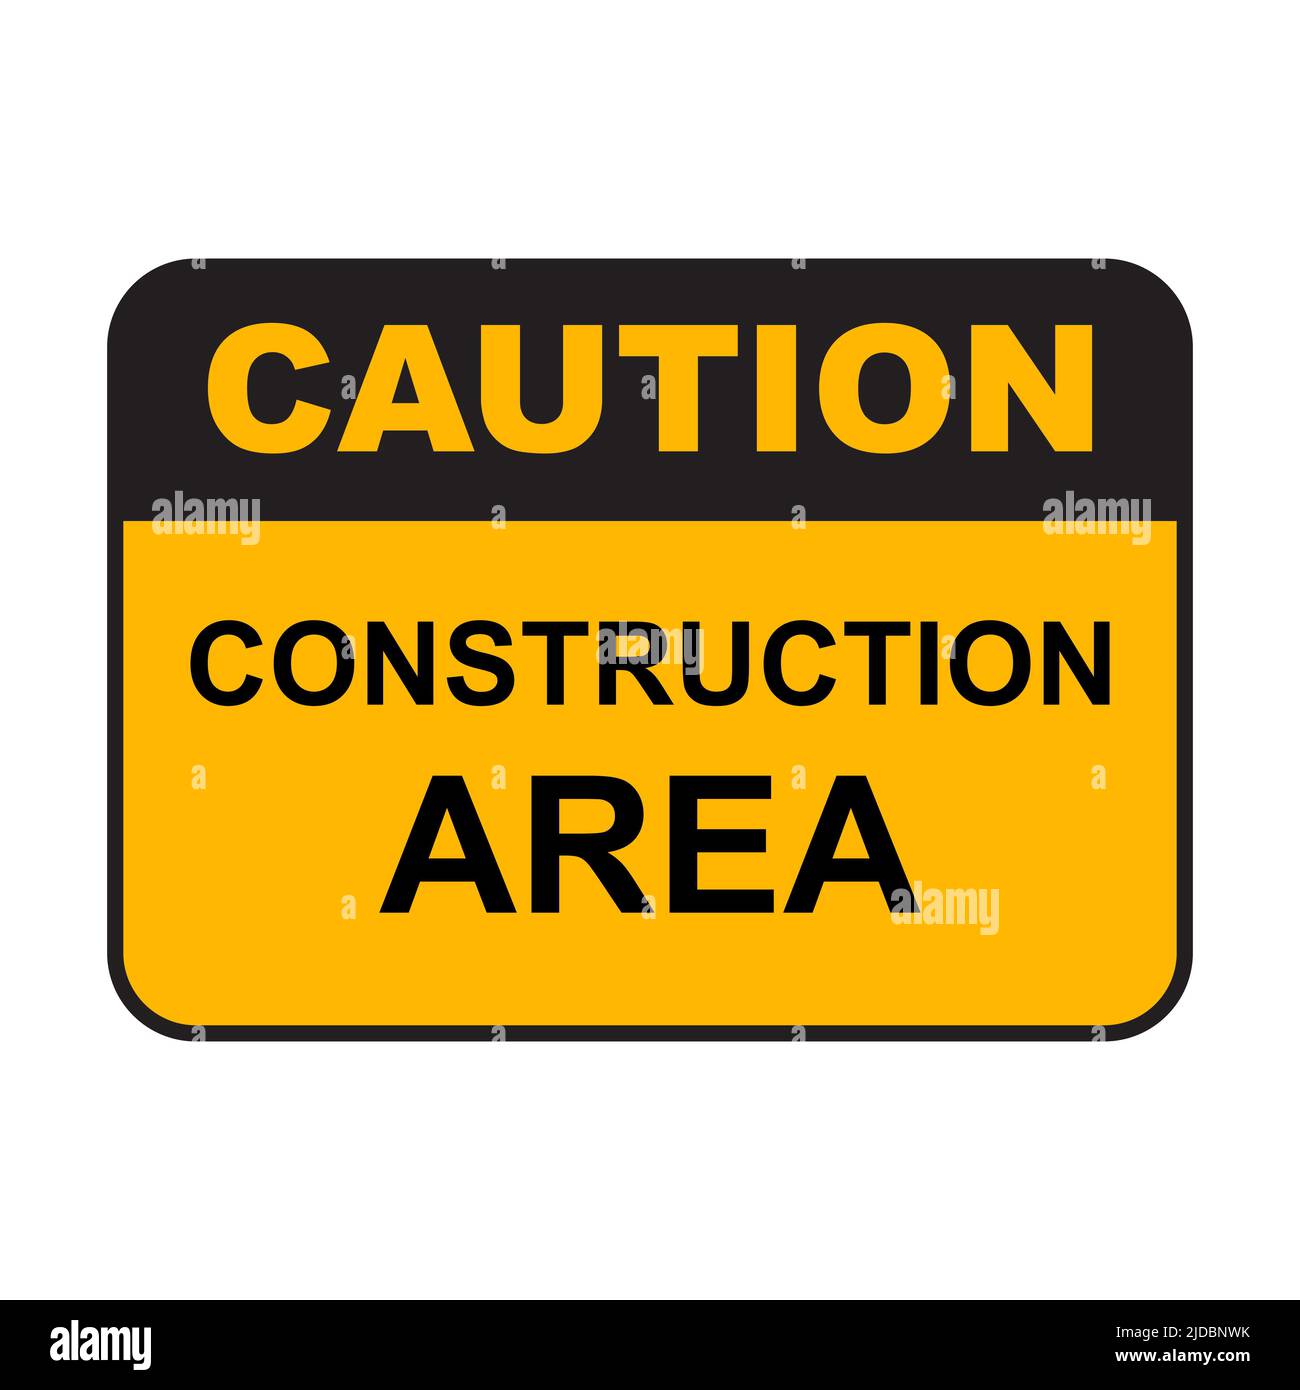 Caution construction area sign icon vector for graphic design, logo ...